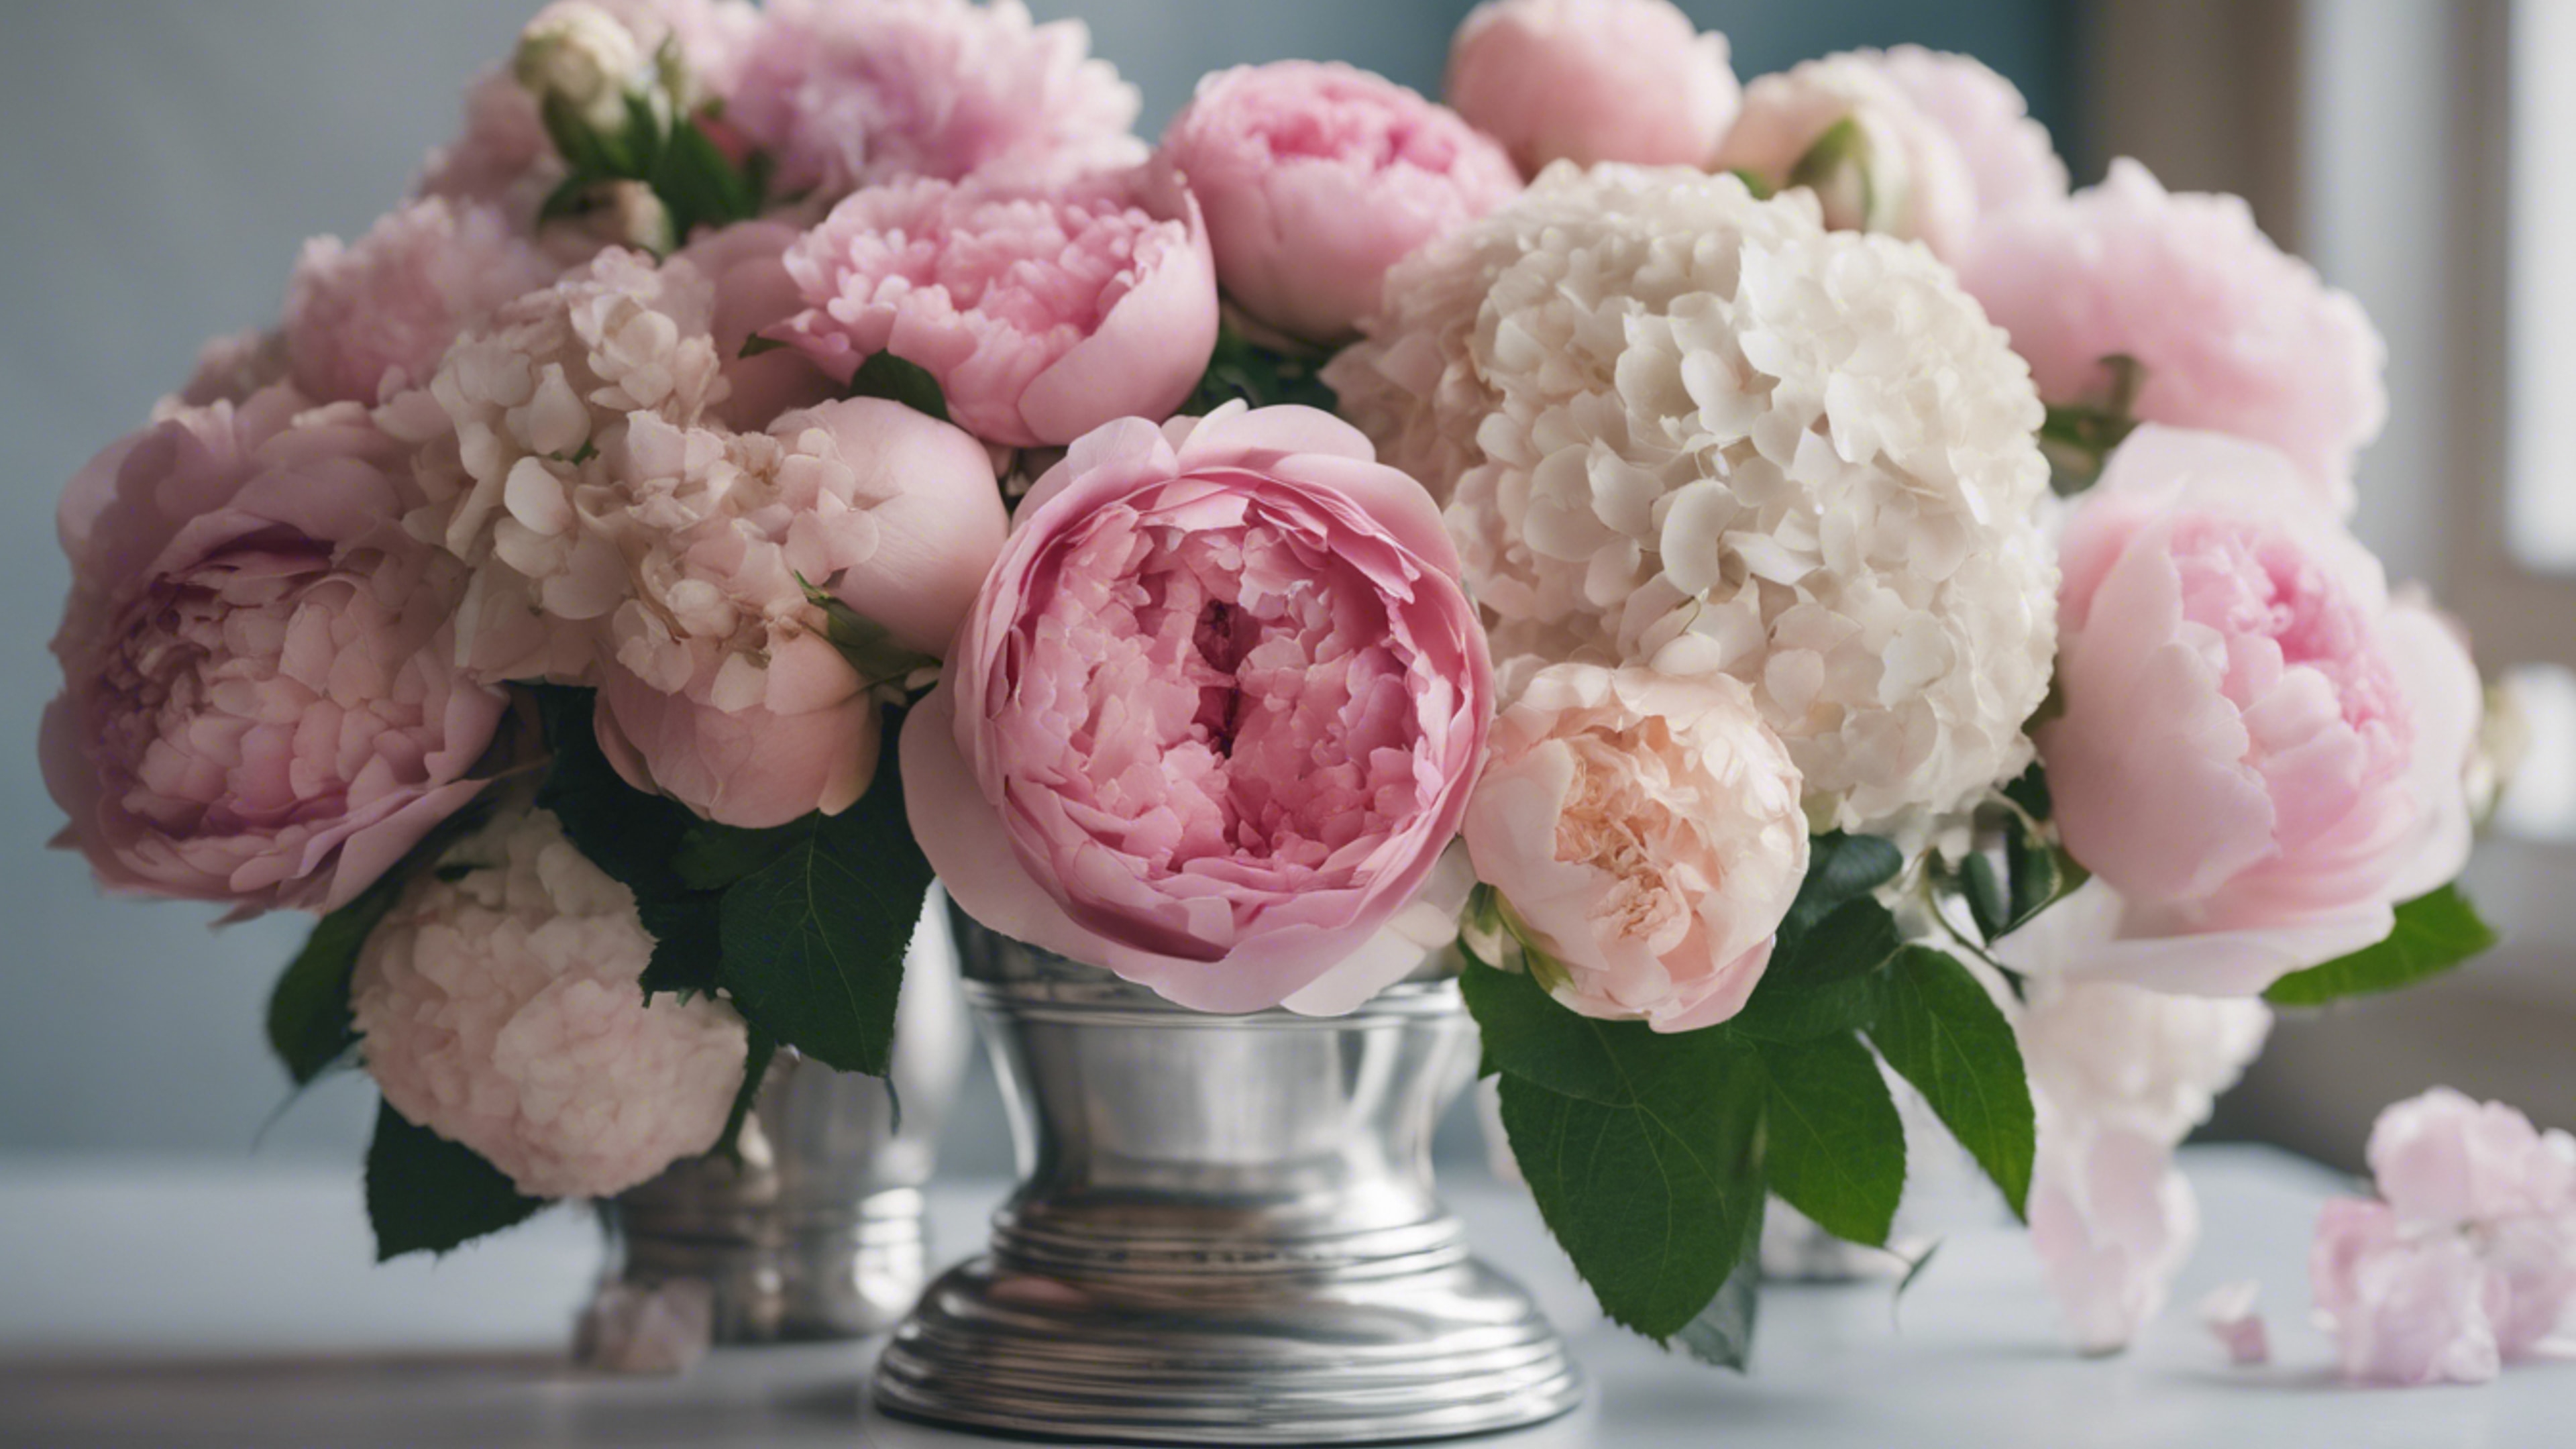 An arrangement of pink roses, peonies, and hydrangeas in a silver vase, embodying preppy elegance. Taustakuva[810d260cf91945bd97fc]